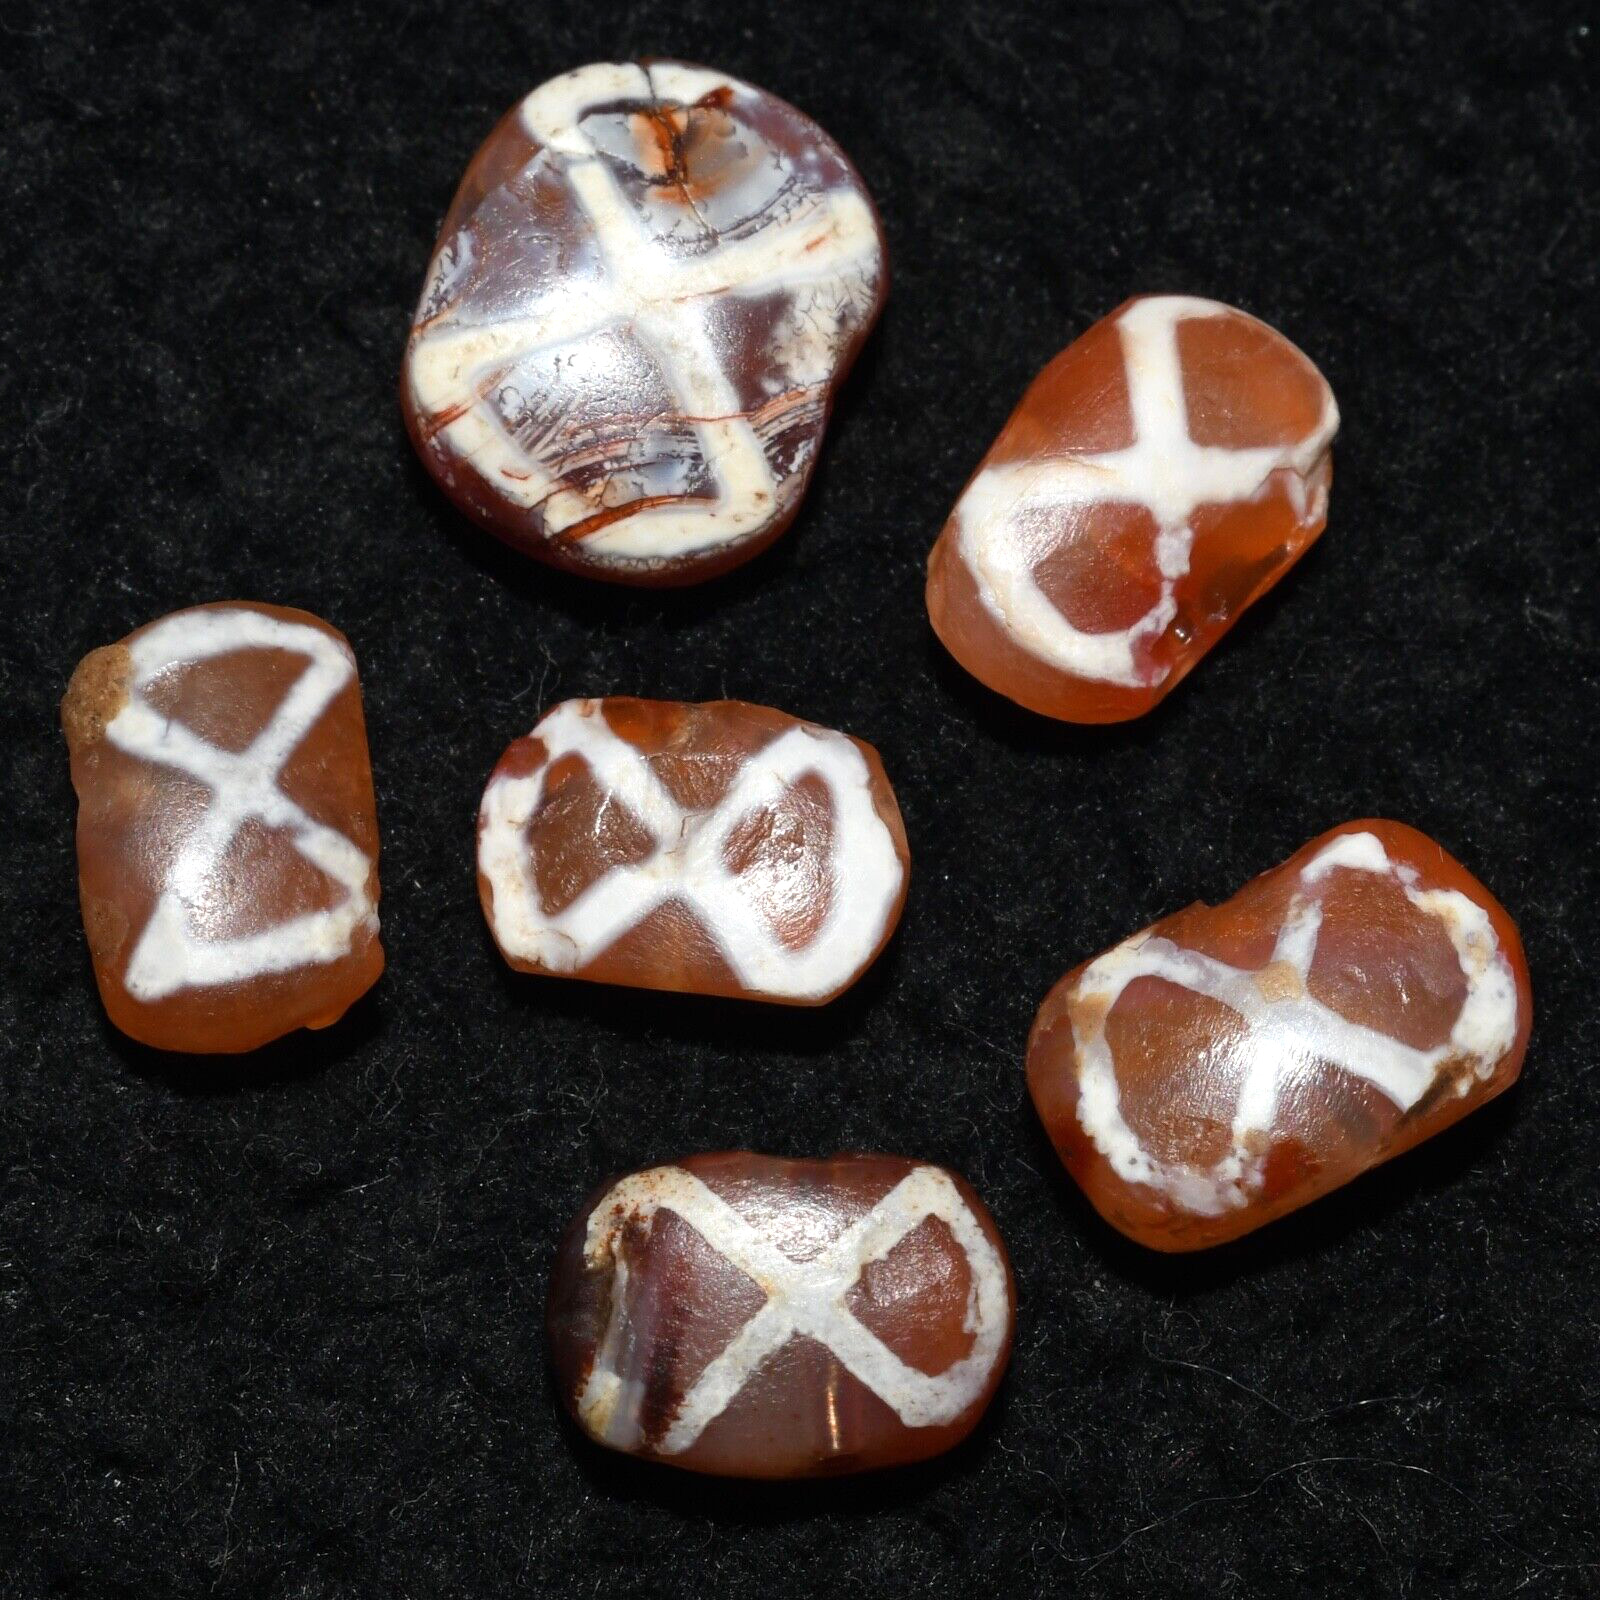 6 Rare Ancient Etched Carnelian Beads with Infinity Pattern over 2000 Years Old